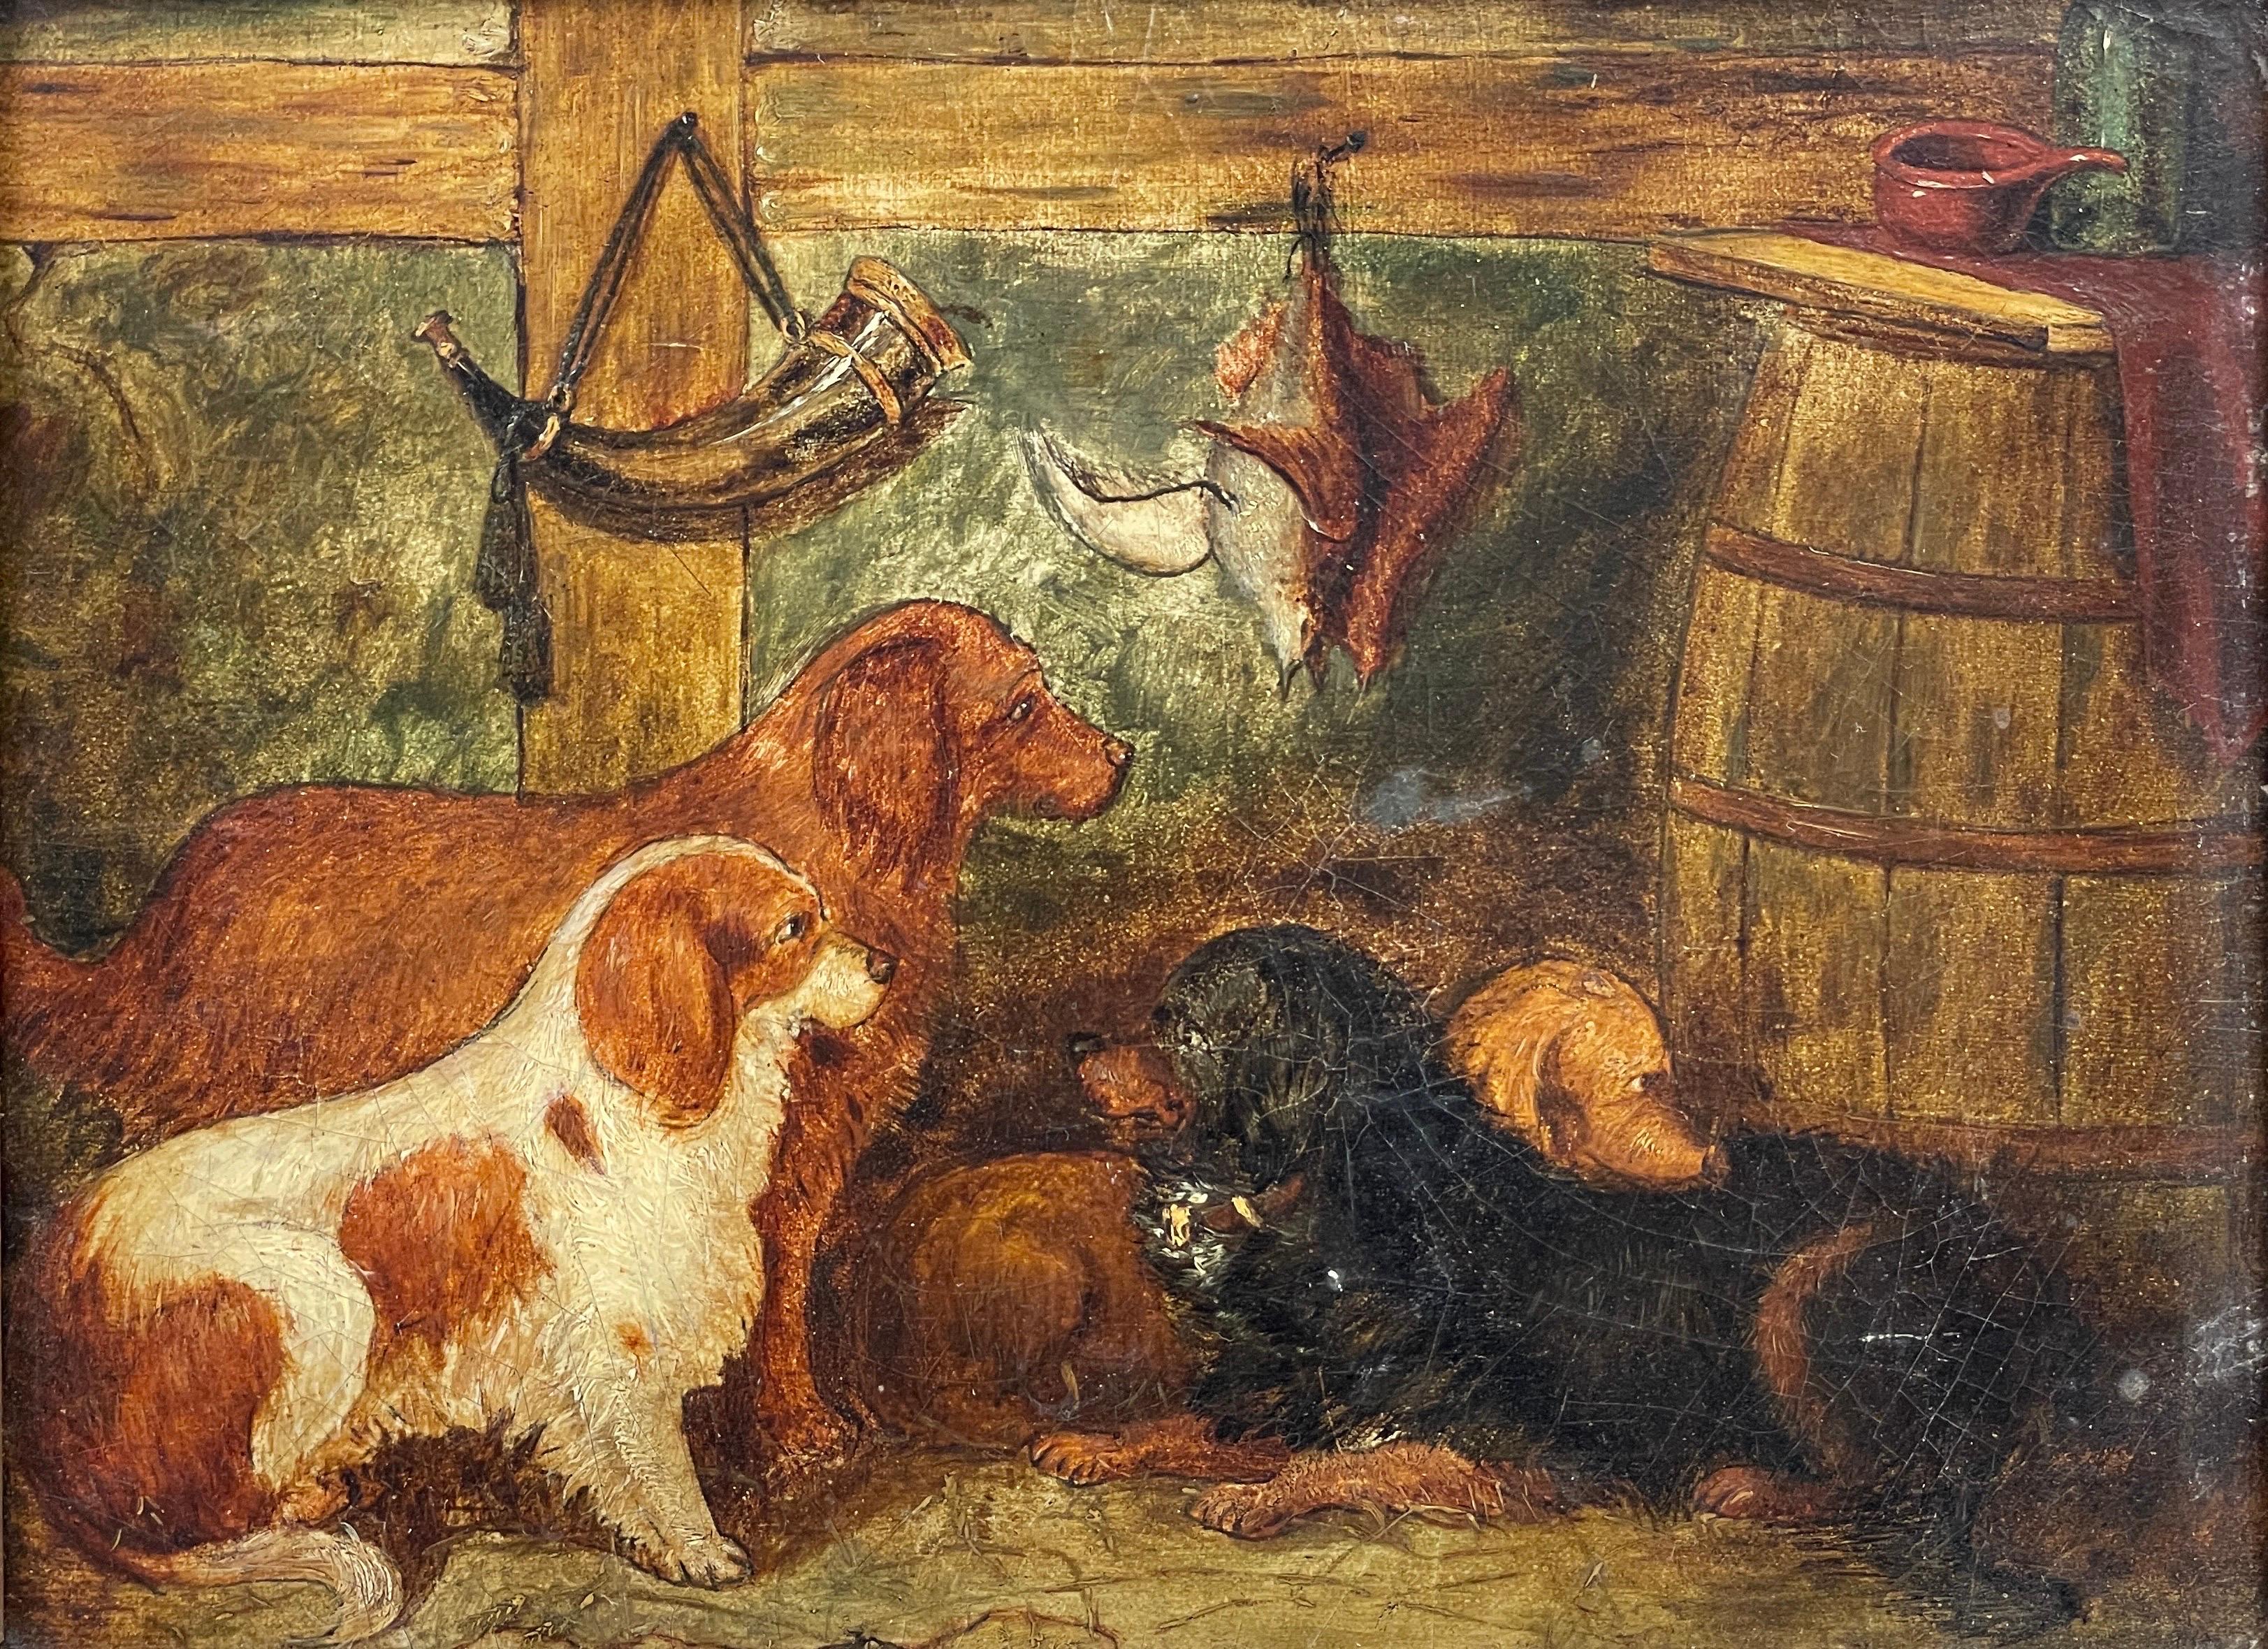 English Antique Animal Painting - 19th Century English Dog Oil Painting Spaniels in Barn Interior